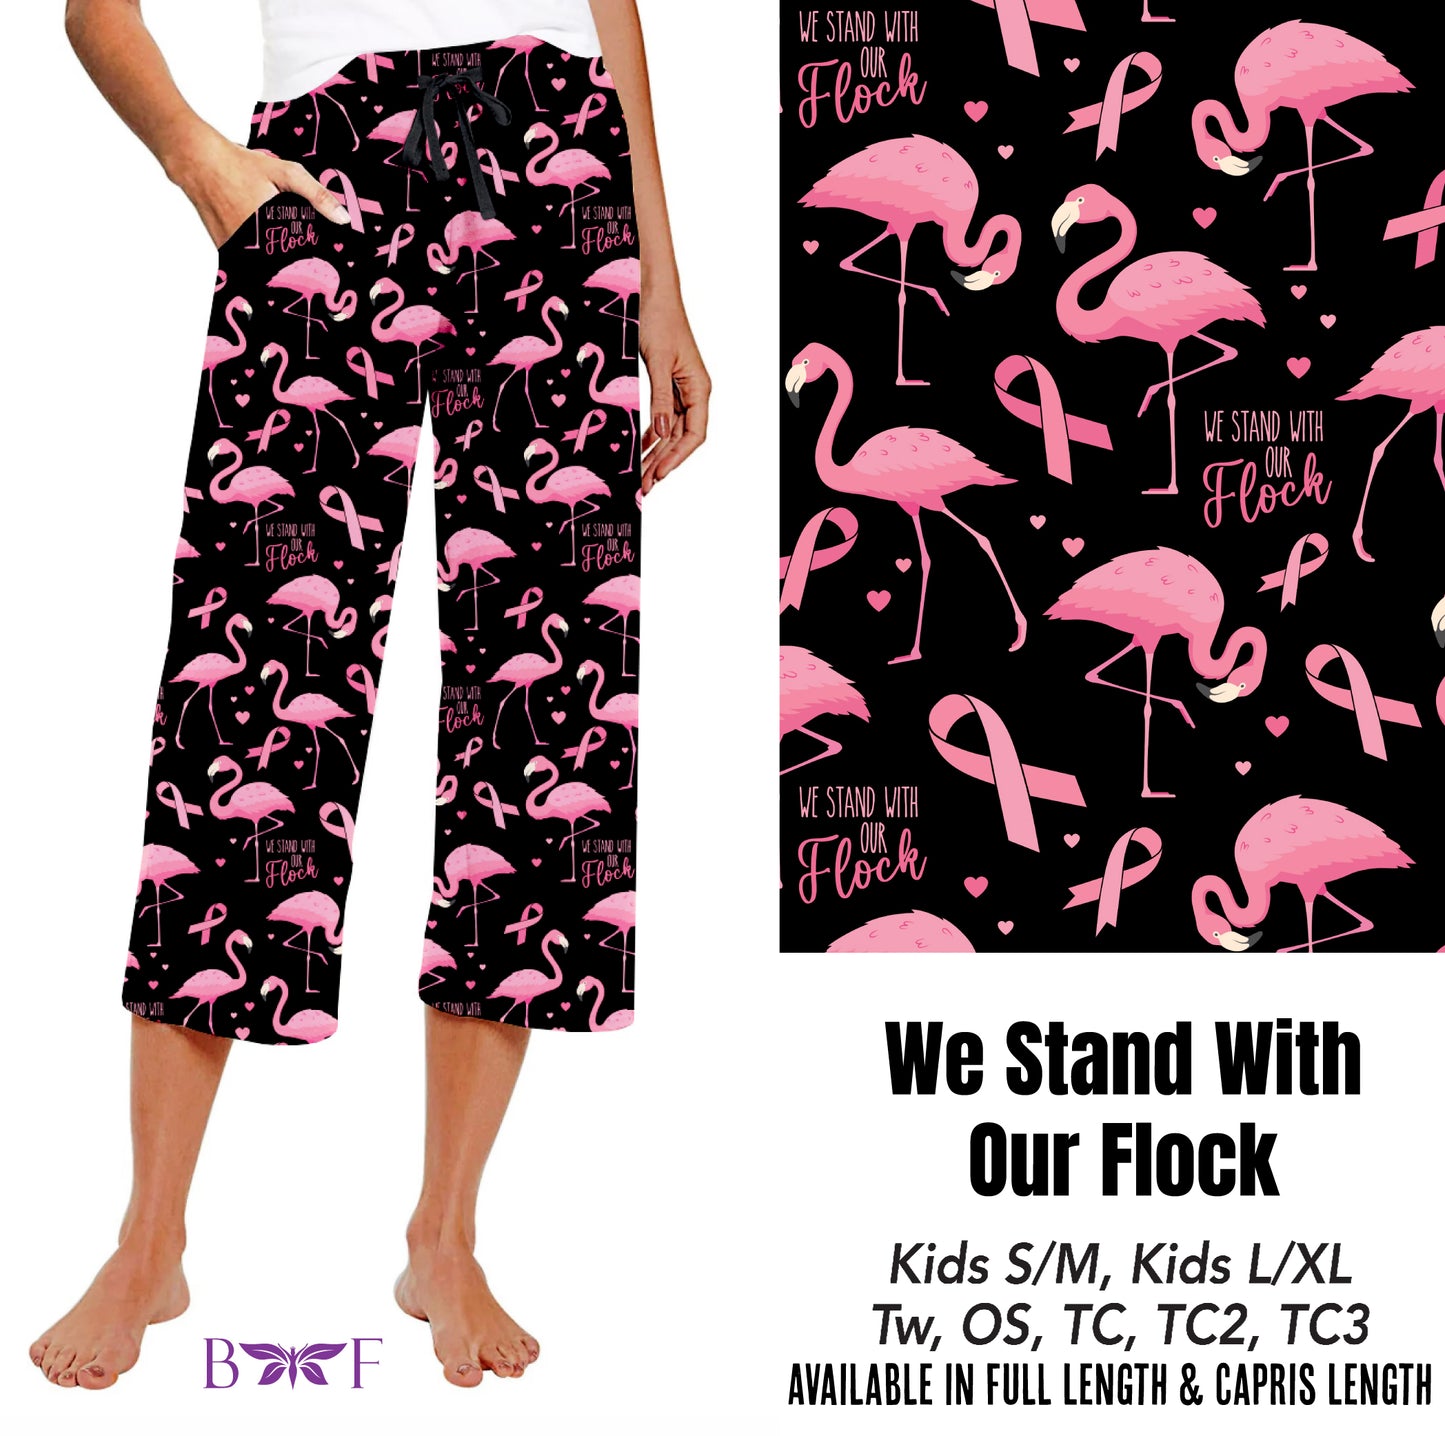 We stand with our flock preorder#0515